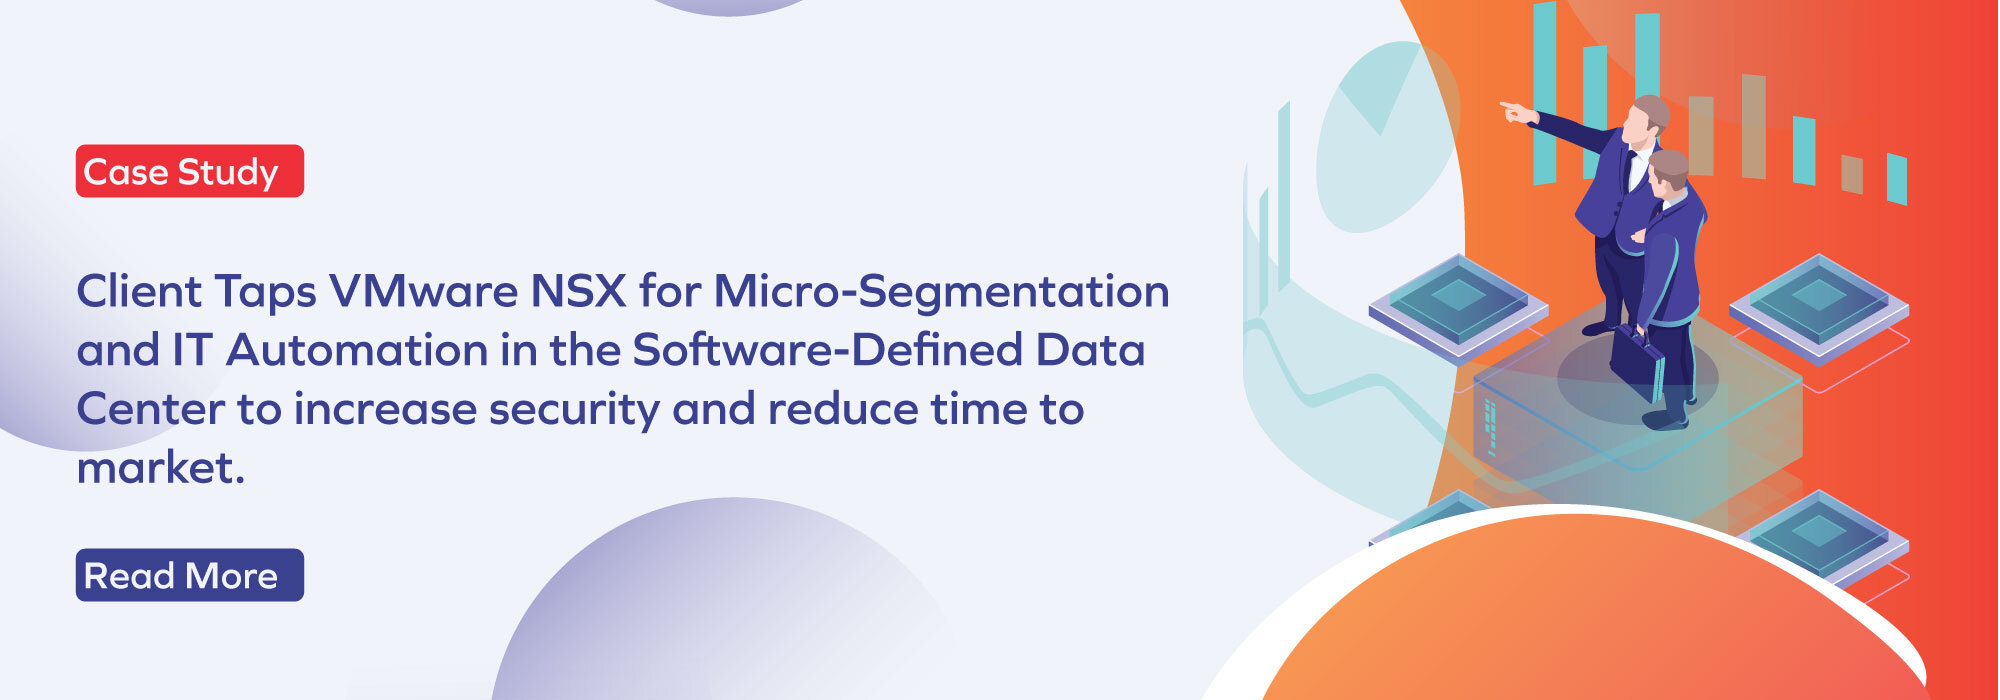 Financial services company increases its security and reduce time to market by implementing Micro-segmentation & IT Automation